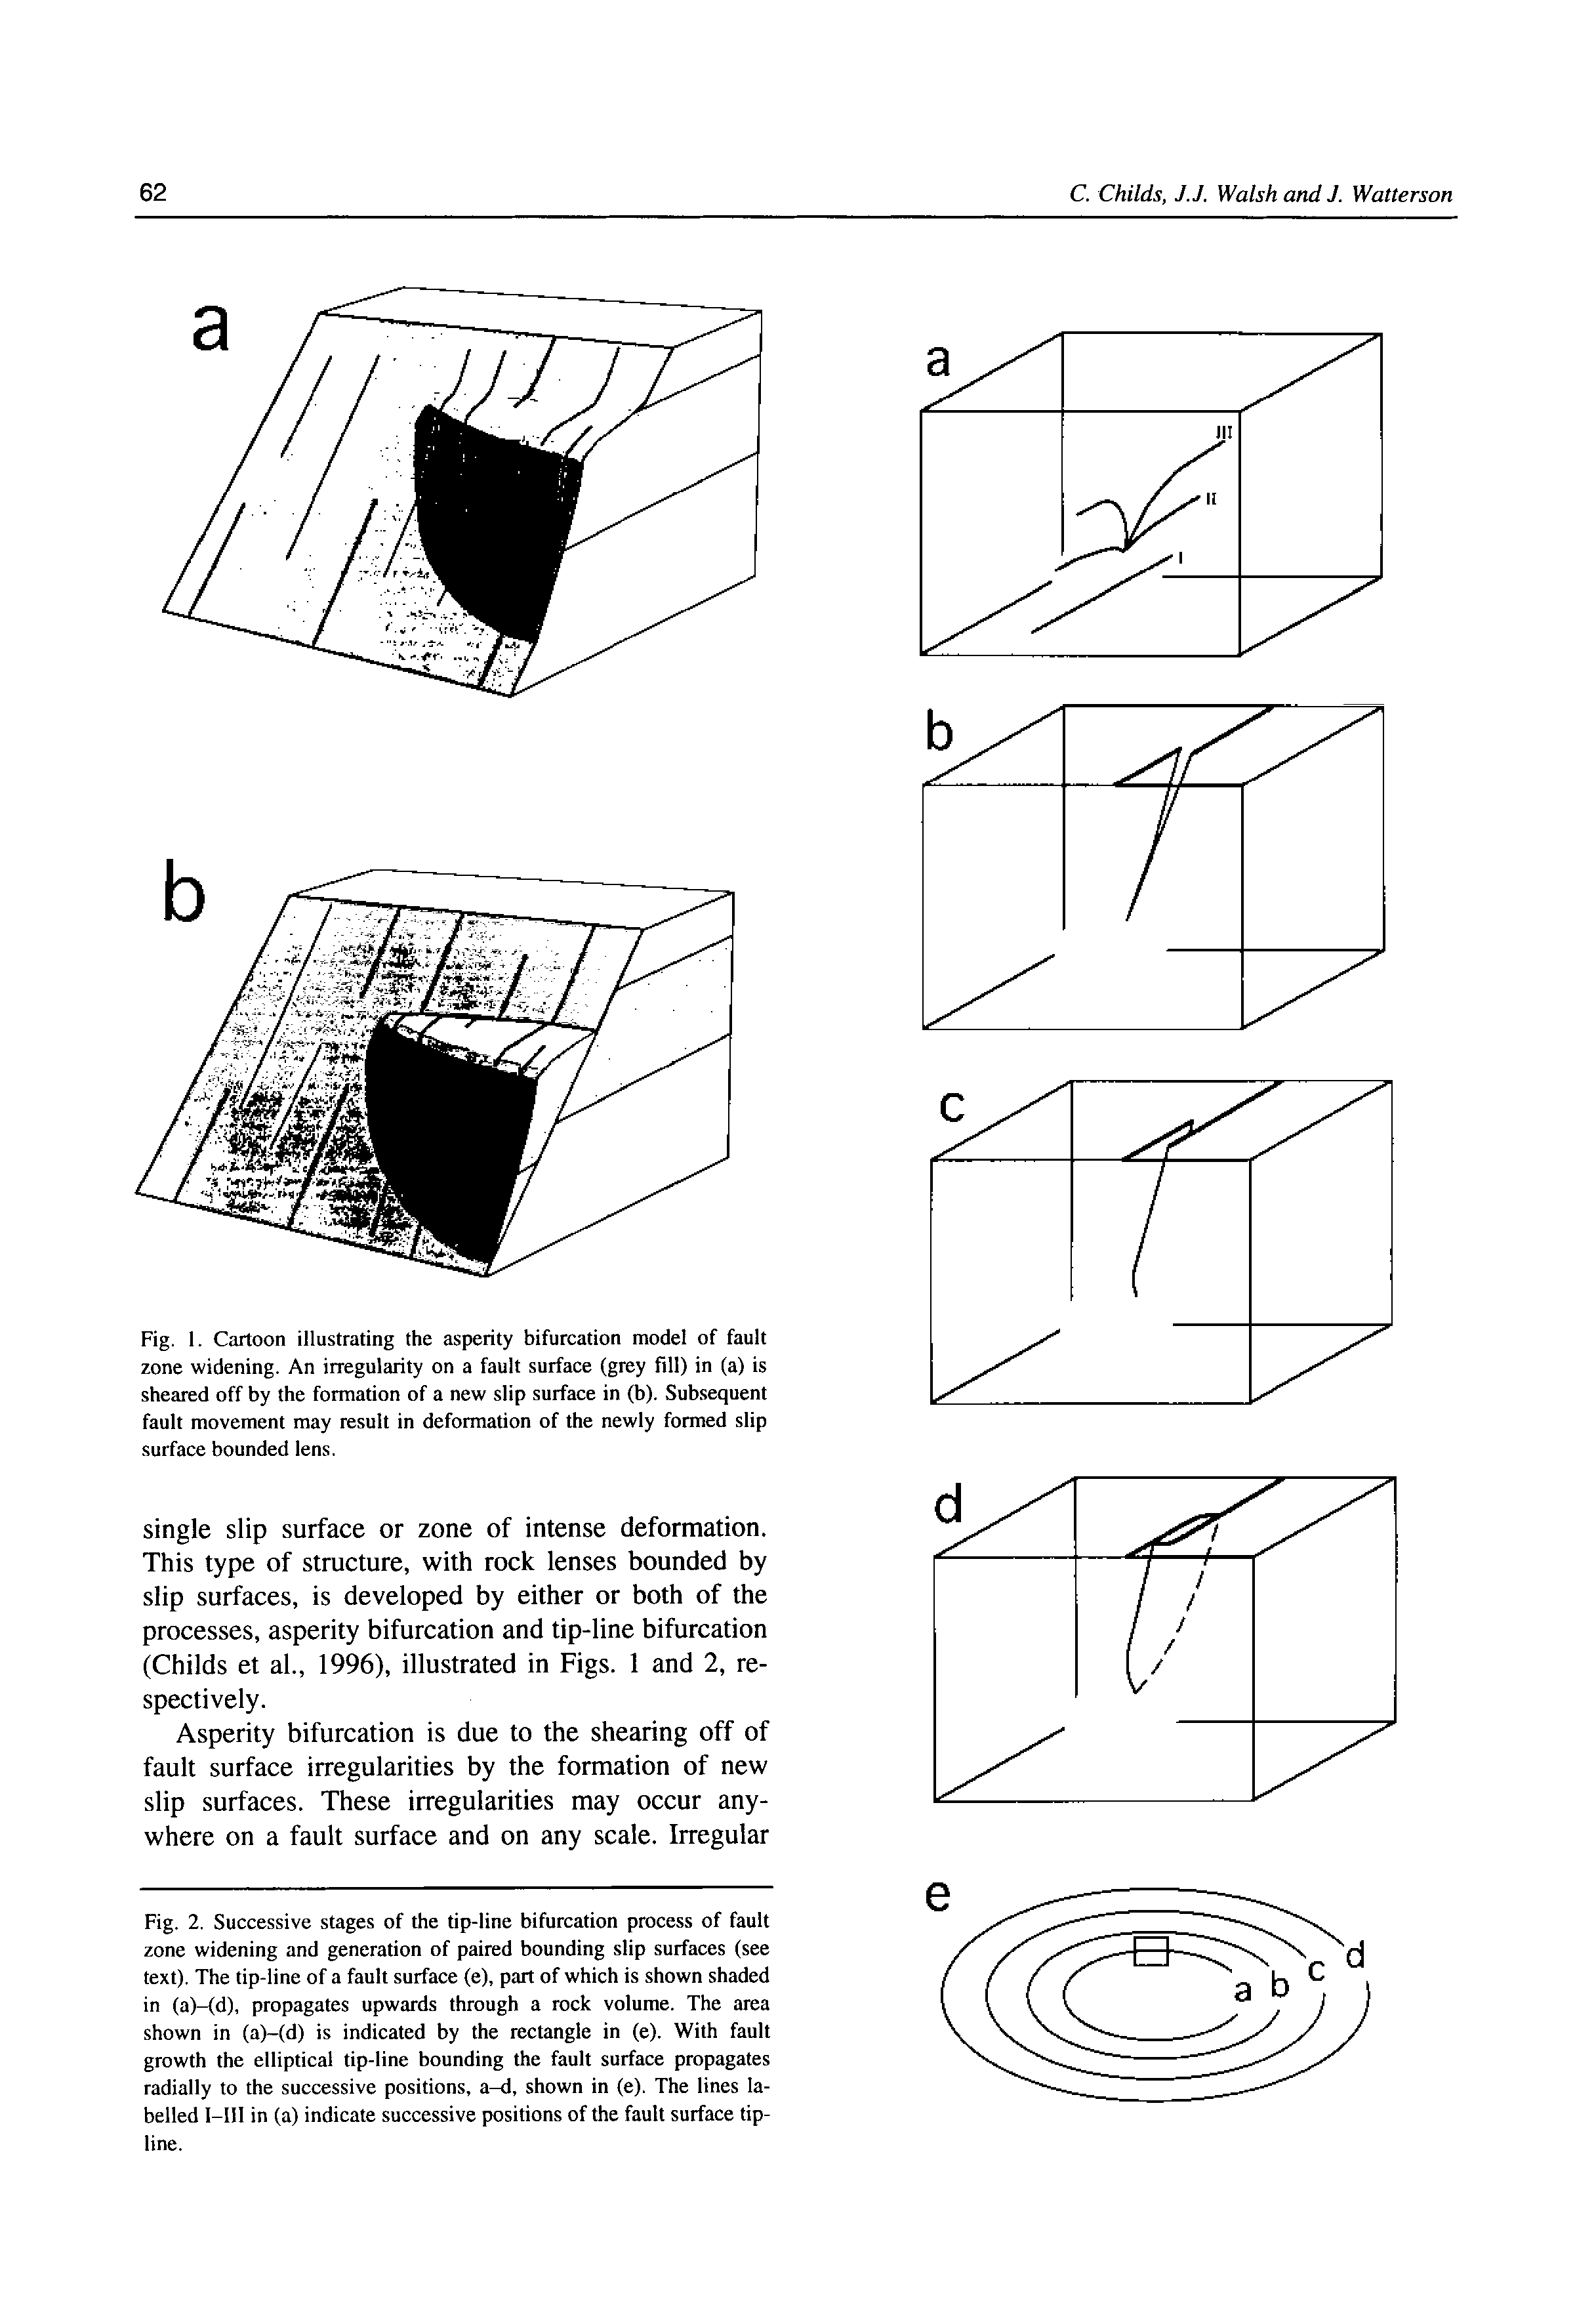 Fig. I. Cartoon illustrating the asperity bifurcation model of fault zone widening. An irregularity on a fault surface (grey fill) in (a) is sheared off by the formation of a new slip surface in (b). Subsequent fault movement may result in deformation of the newly formed slip surface bounded lens.